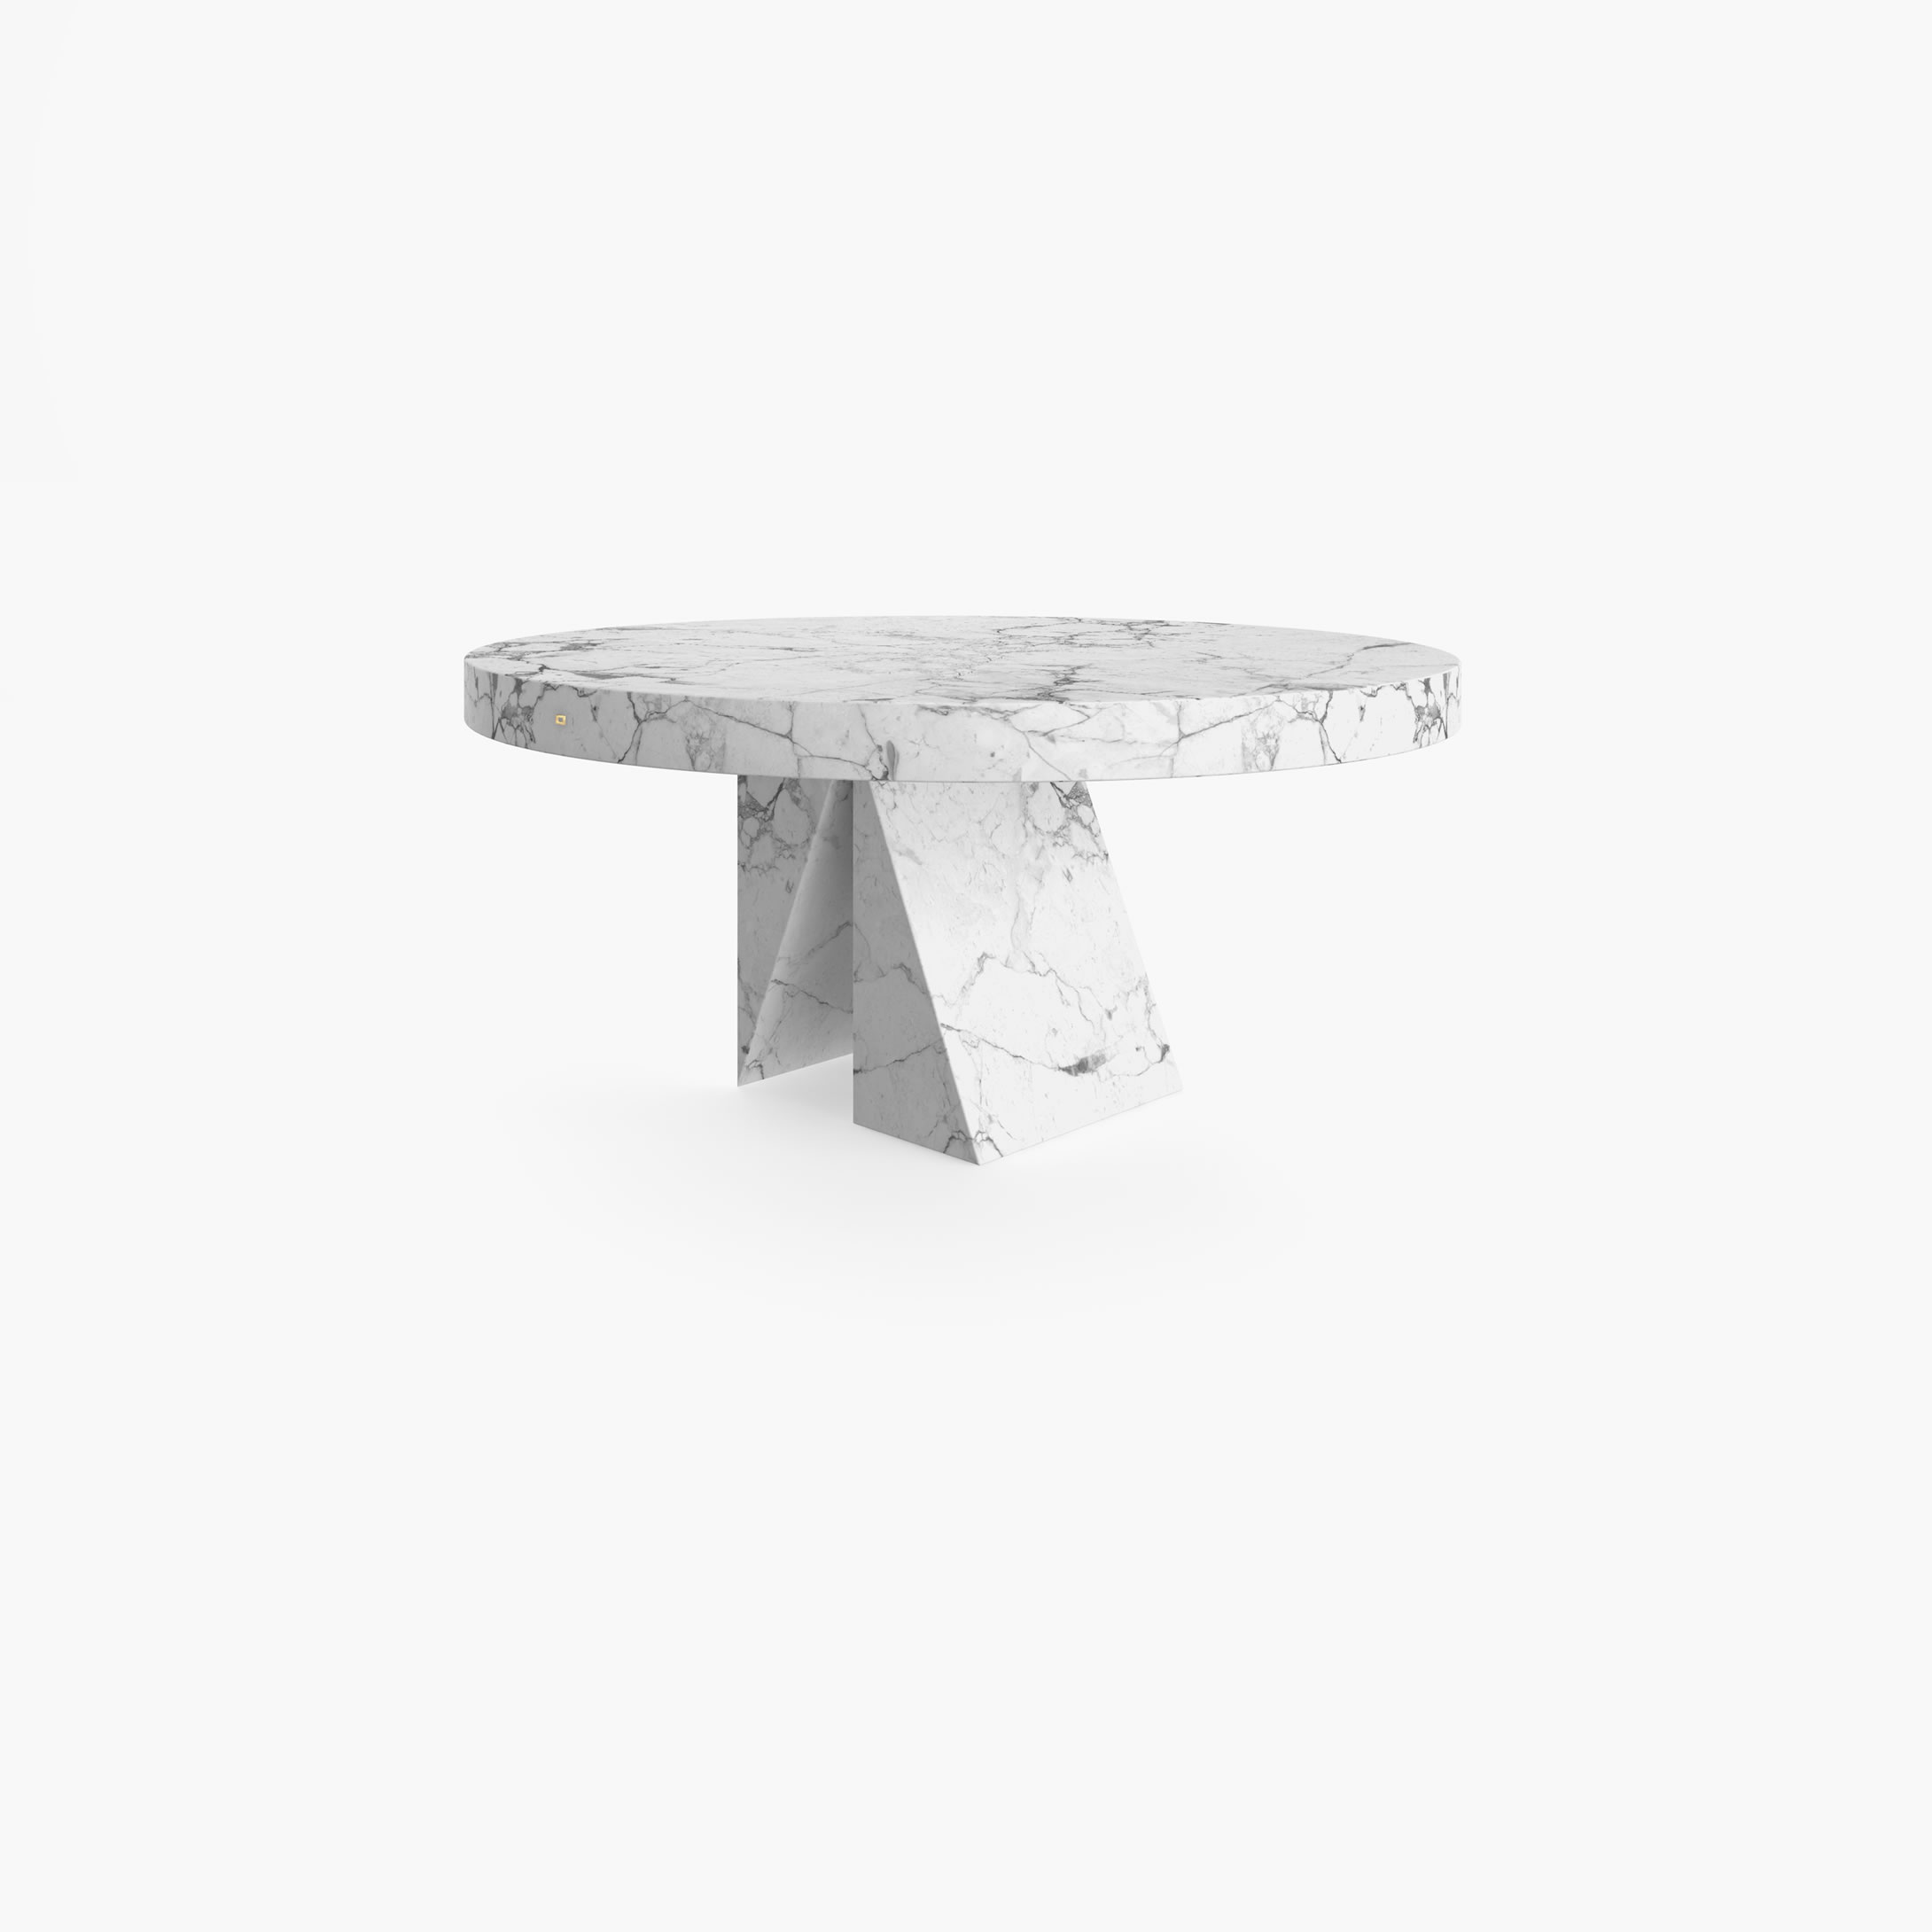 Dining Table round prisms legs White Arabescato Marble exclusive Dining Room design Dining Tables FS 194 D FELIX SCHWAKE